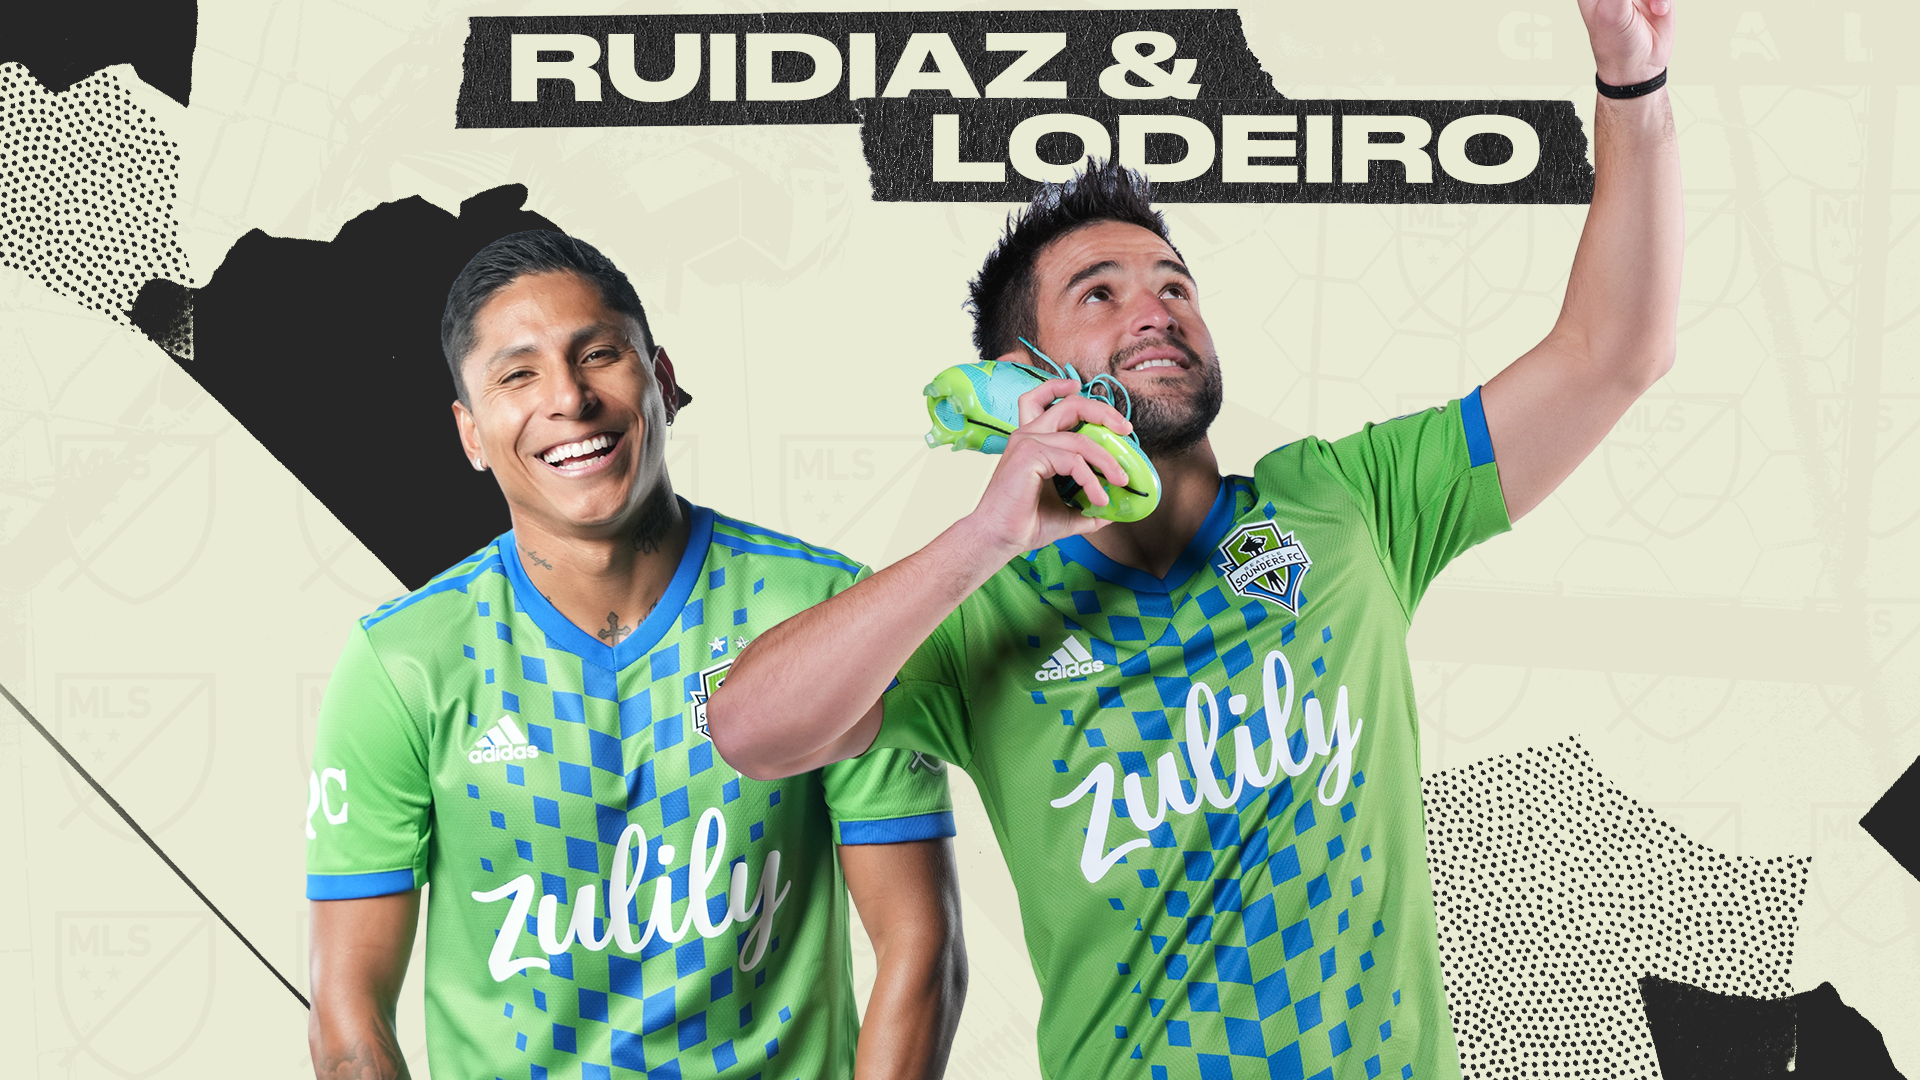 “Reins are off” for Seattle Sounders’ Ruidiaz, Lodeiro heading into CCL semis | MLSSoccer.com